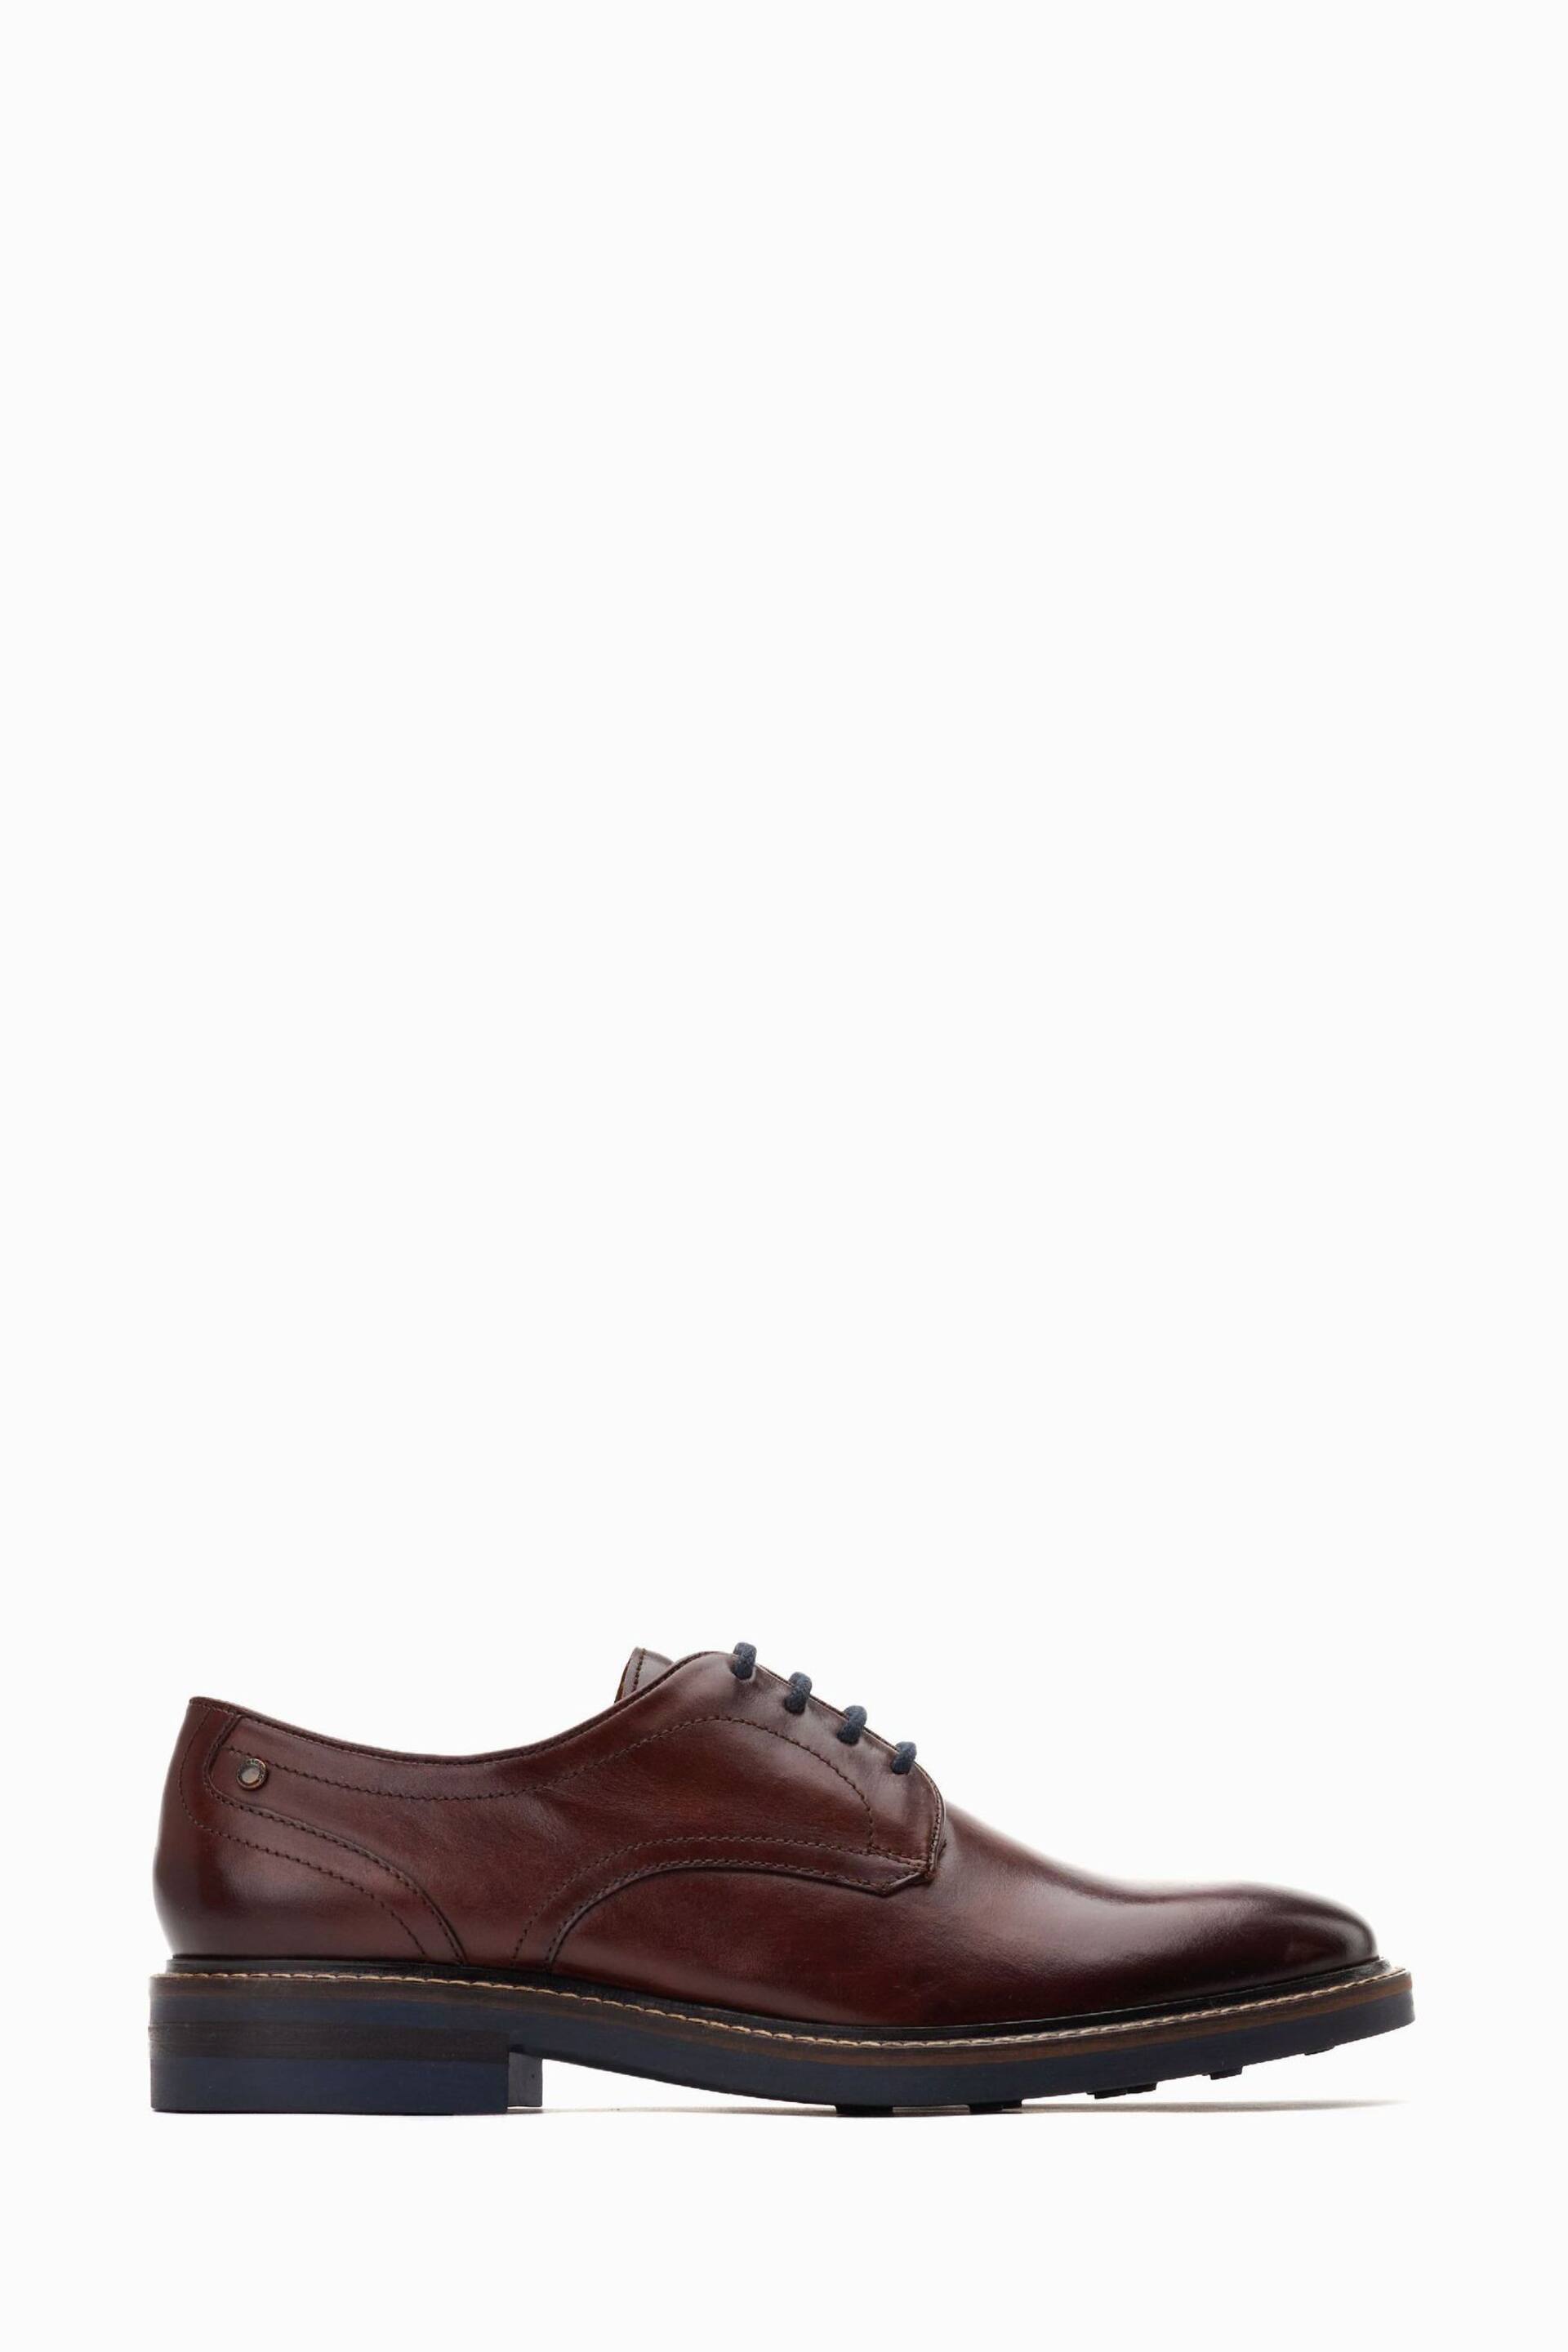 Base London Mawley Lace-Up Derby Shoes - Image 1 of 6